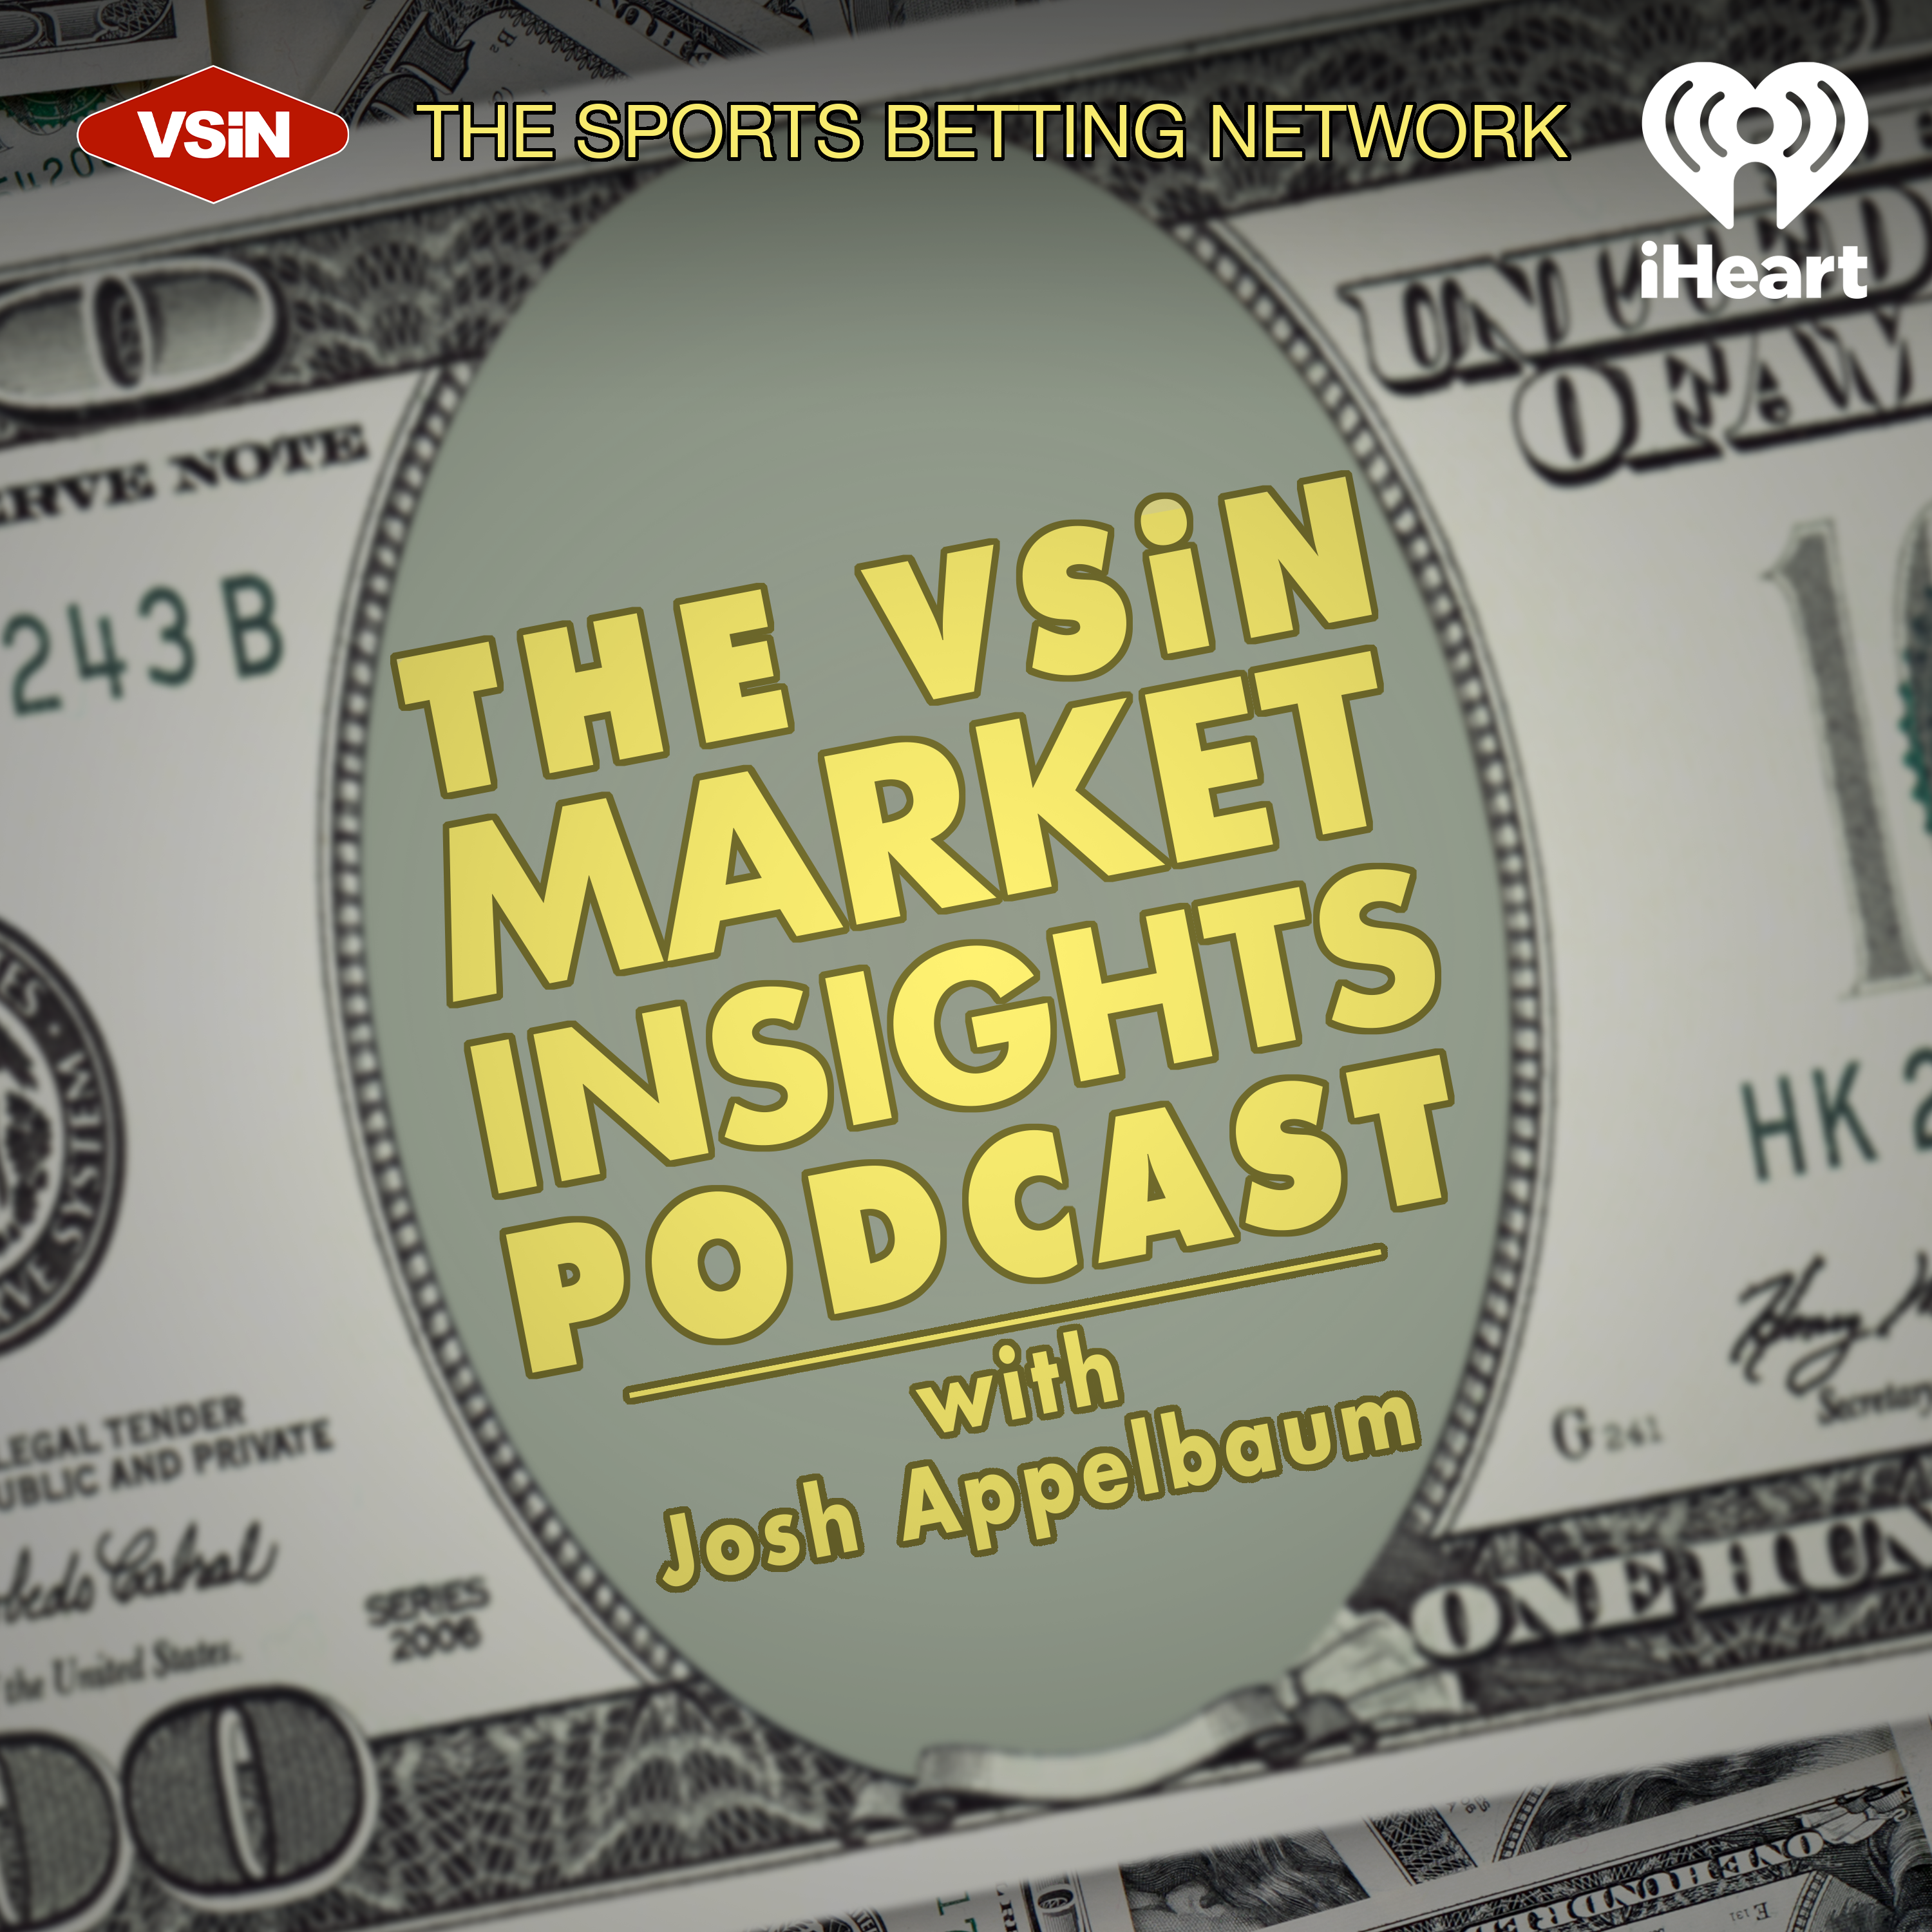 The VSiN Market Insights Podcast with Josh Appelbaum | February 24, 2022